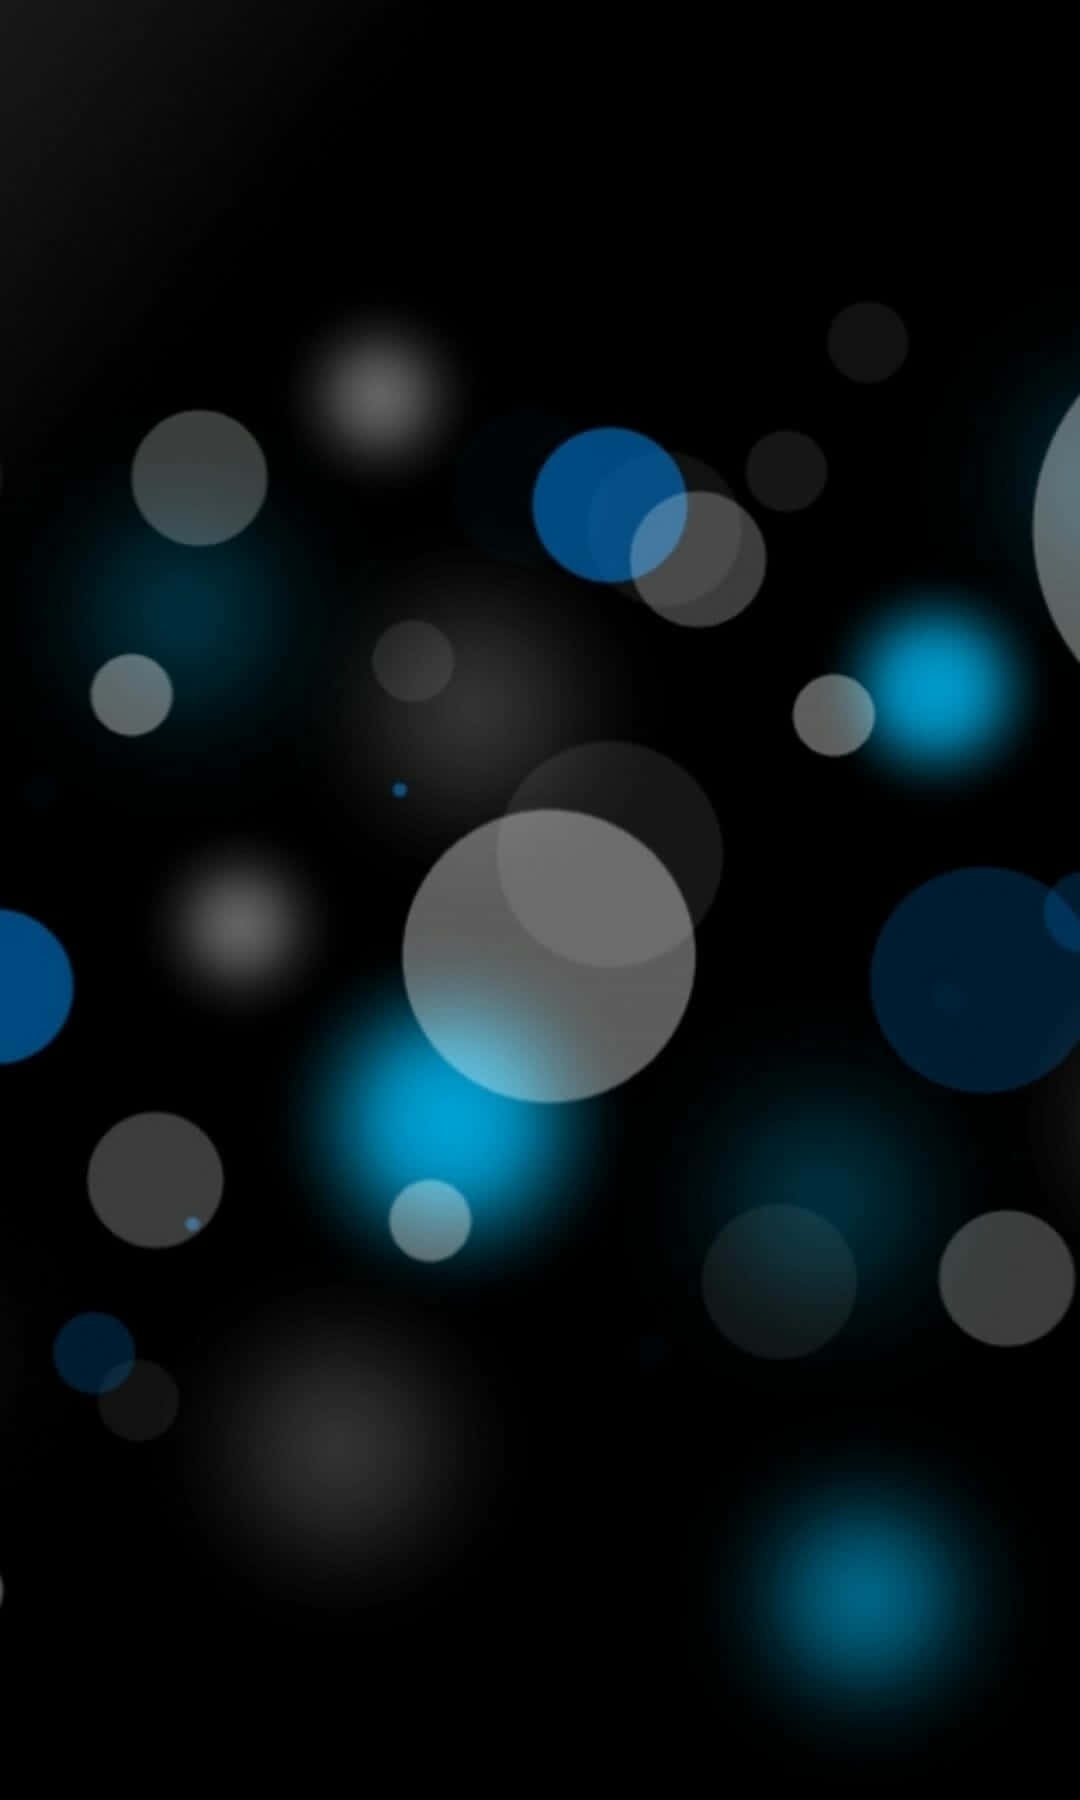 Blue And White Circles On A Black Background Wallpaper